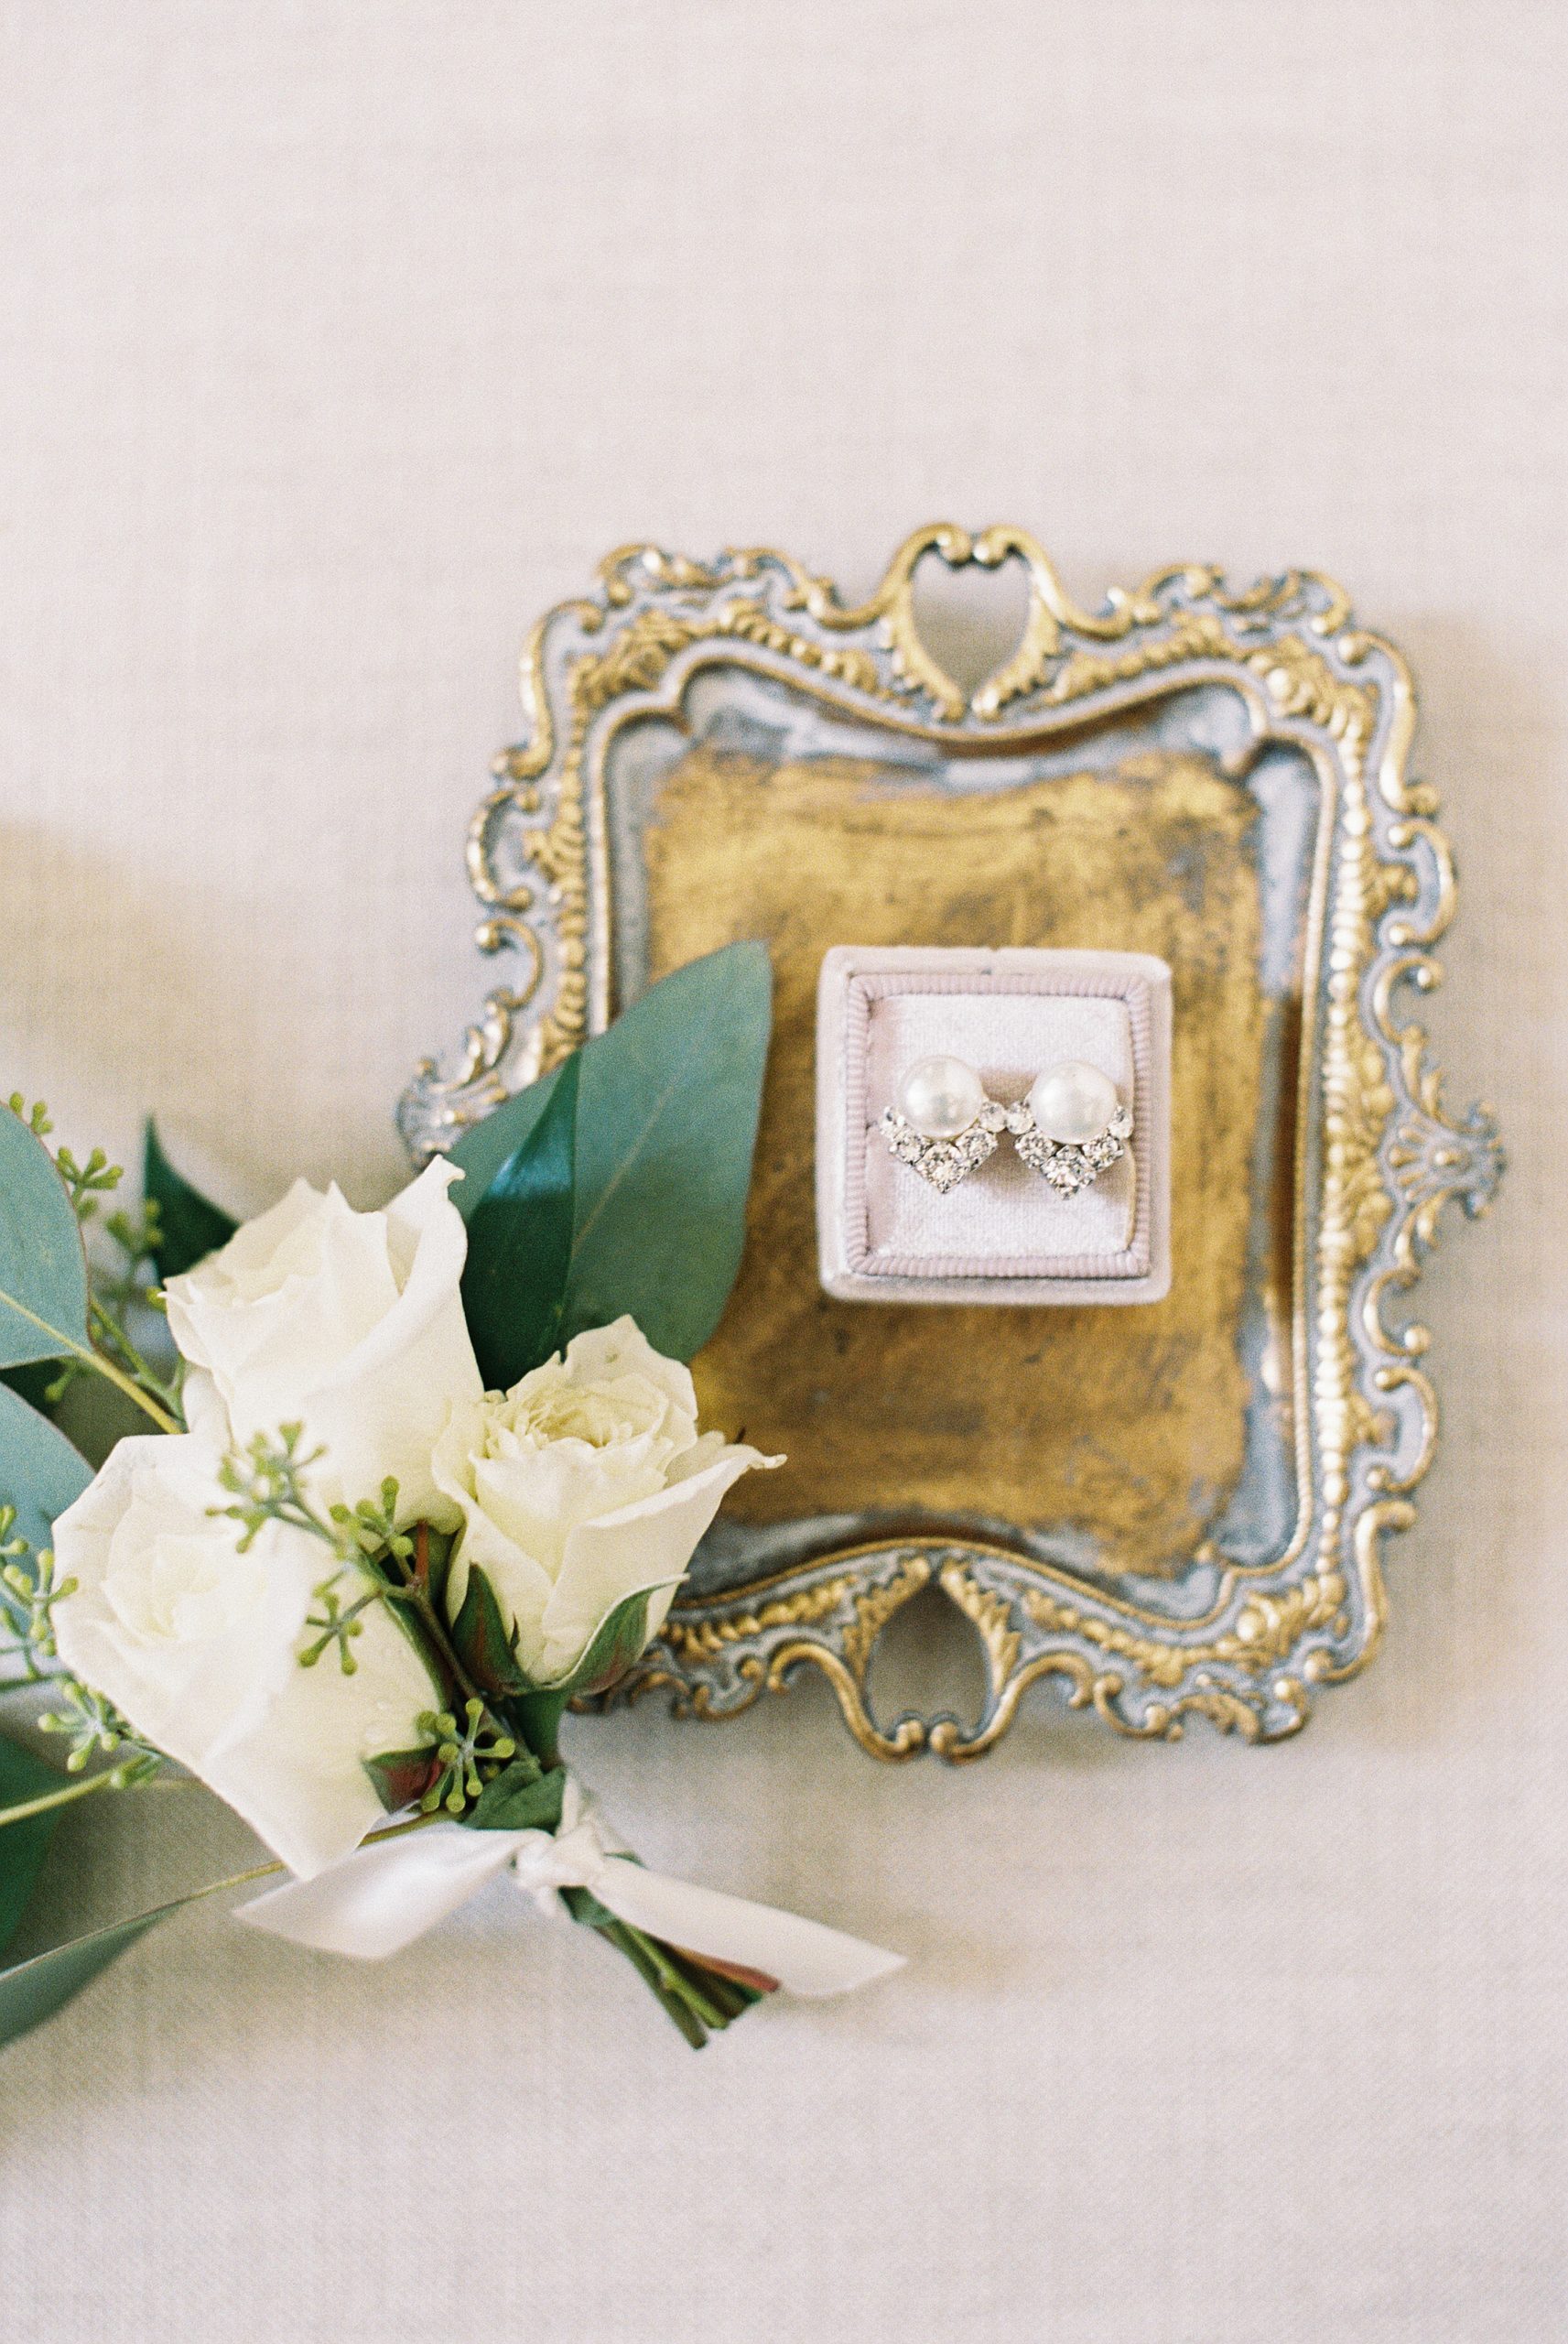 pearl earrings styled in mrs box bridal details for madison beach hotel micro wedding